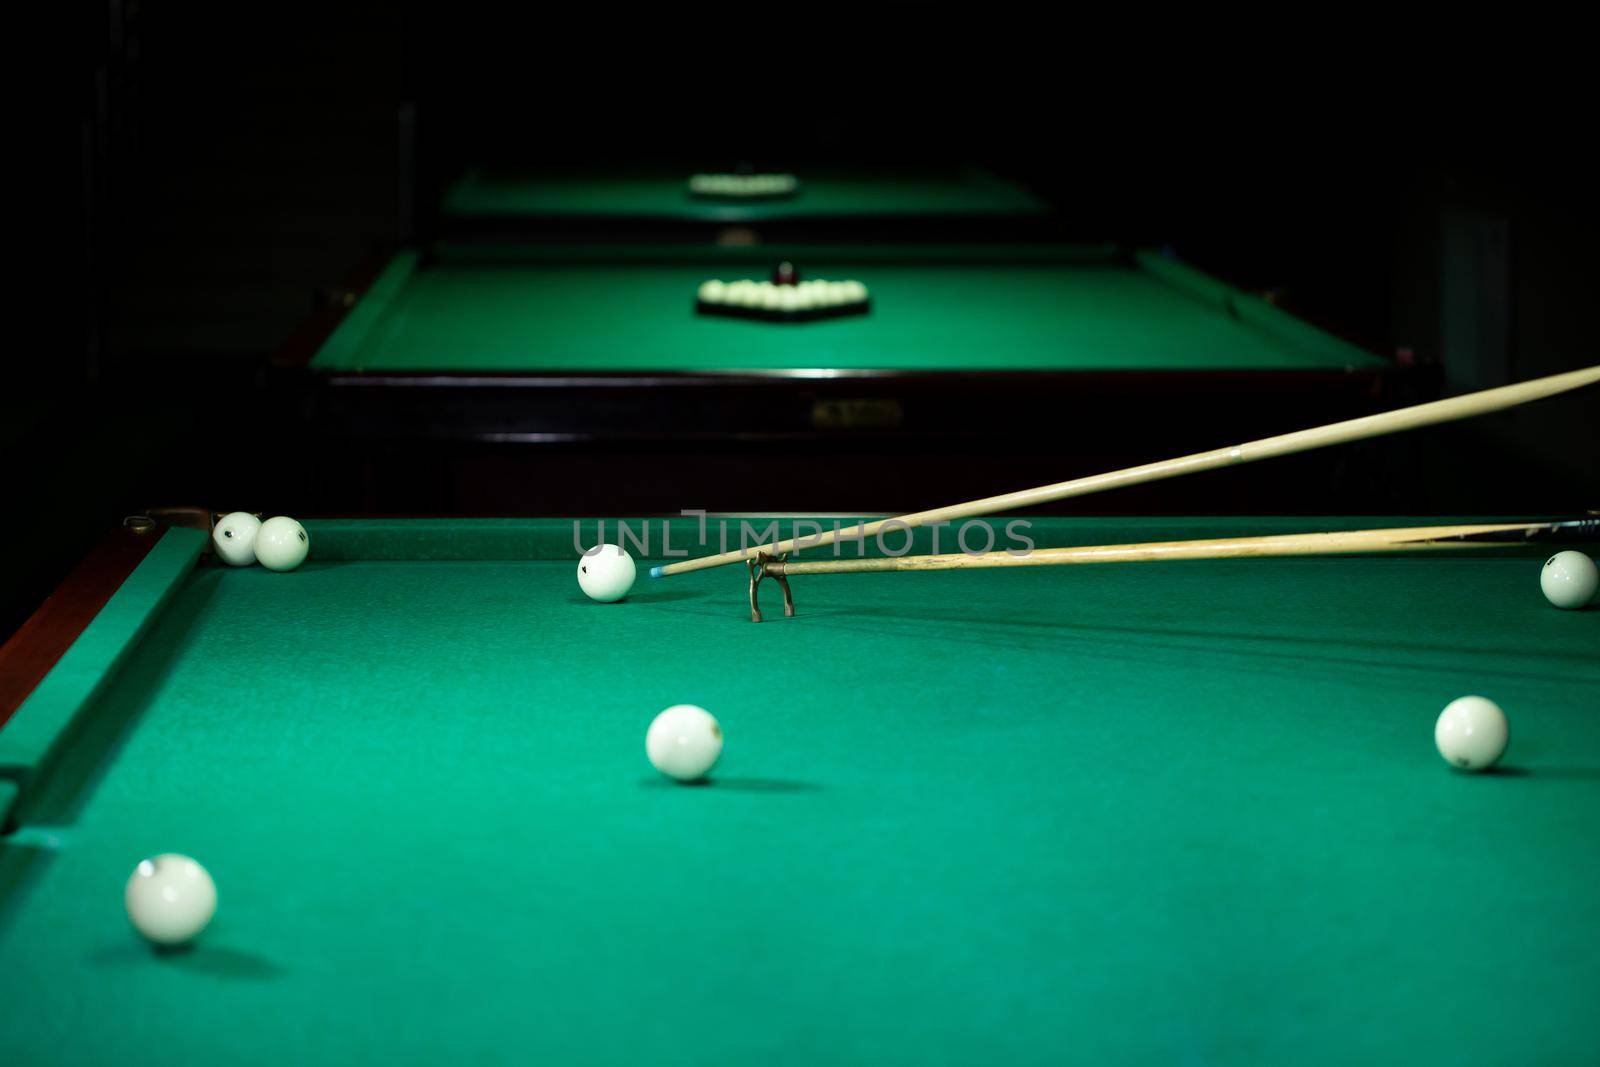 Billiard balls in a green pool table. by StudioPeace